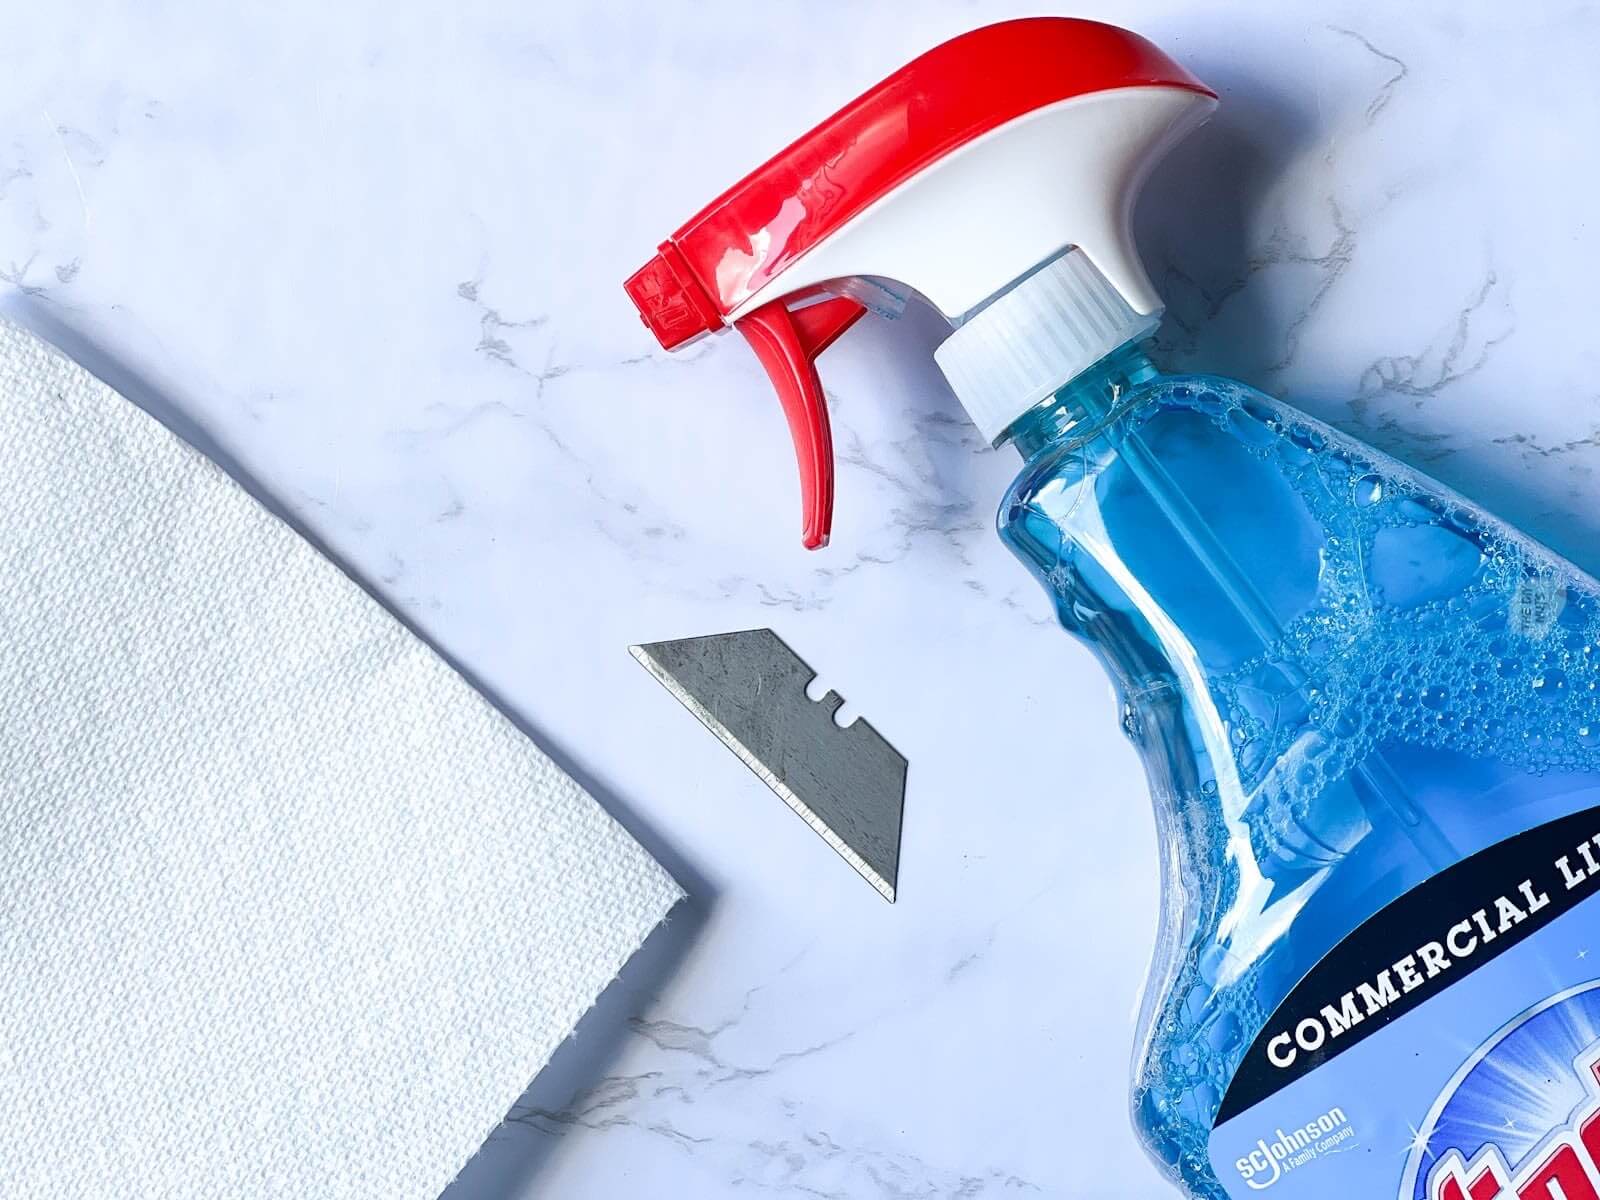 glass cleaner in spray bottle, razor blade and paper towel on marble countertop.